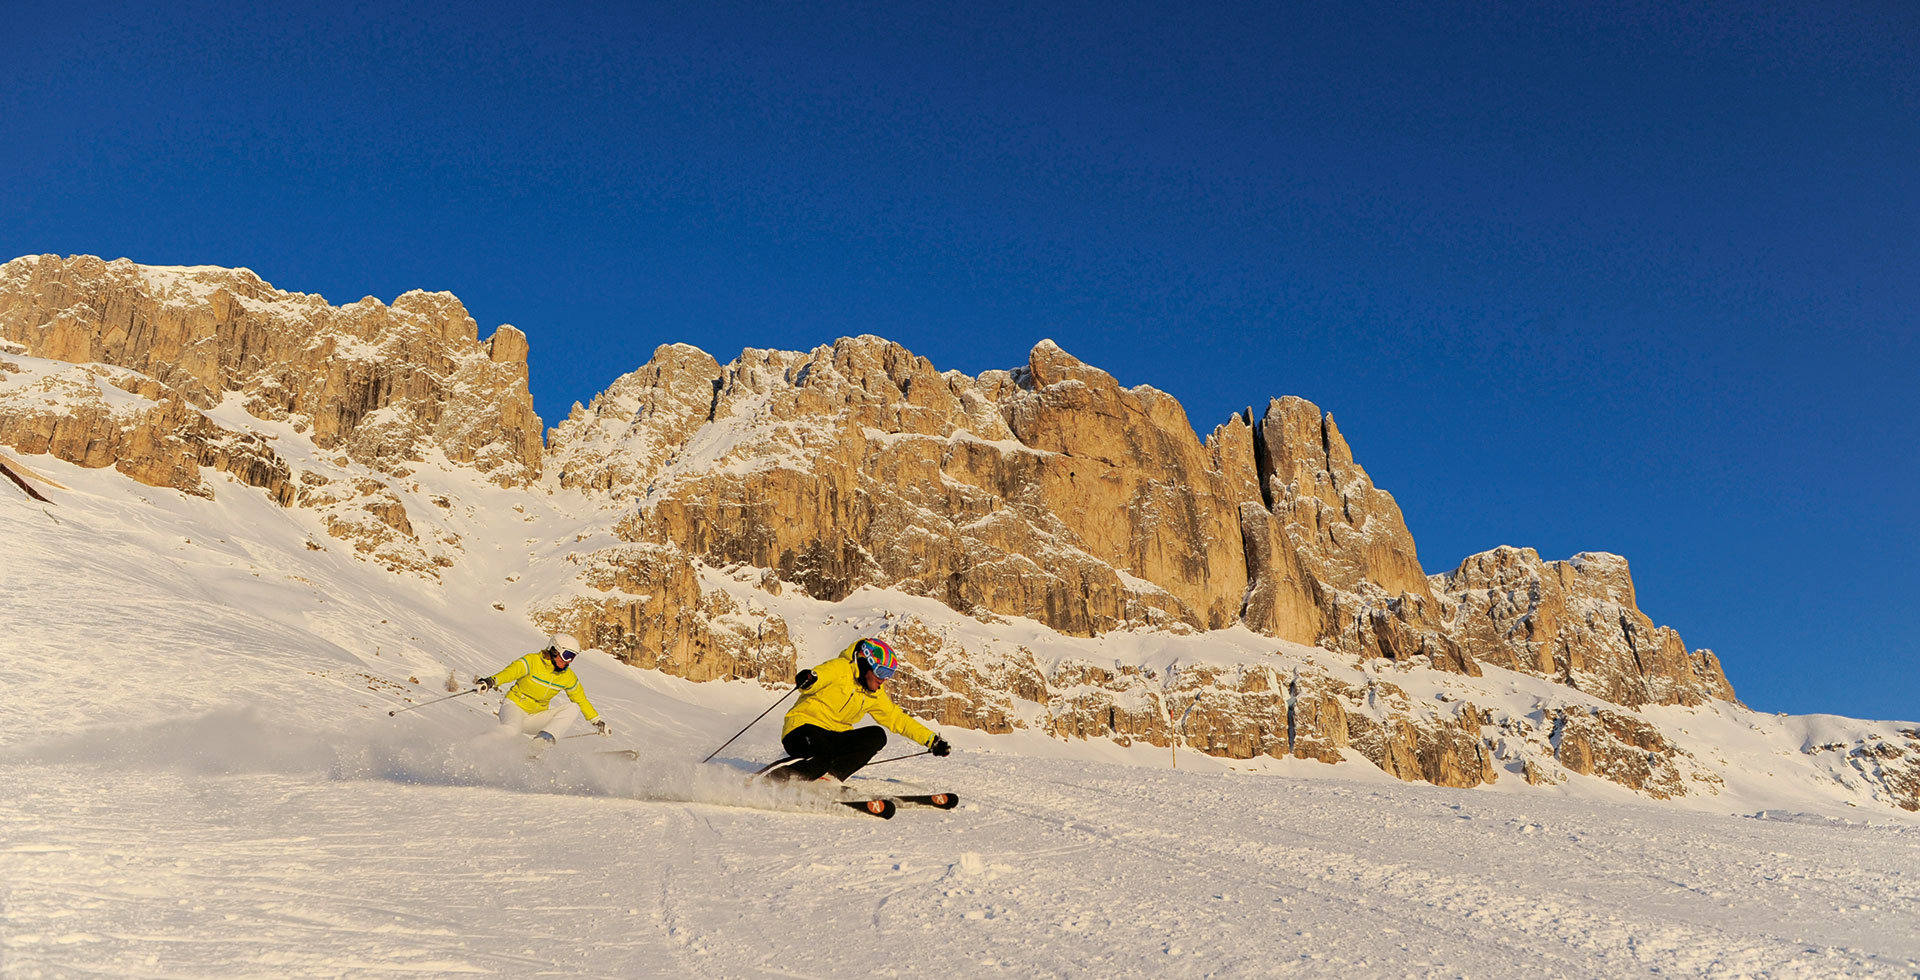 Skiing in the heart of the Dolomites